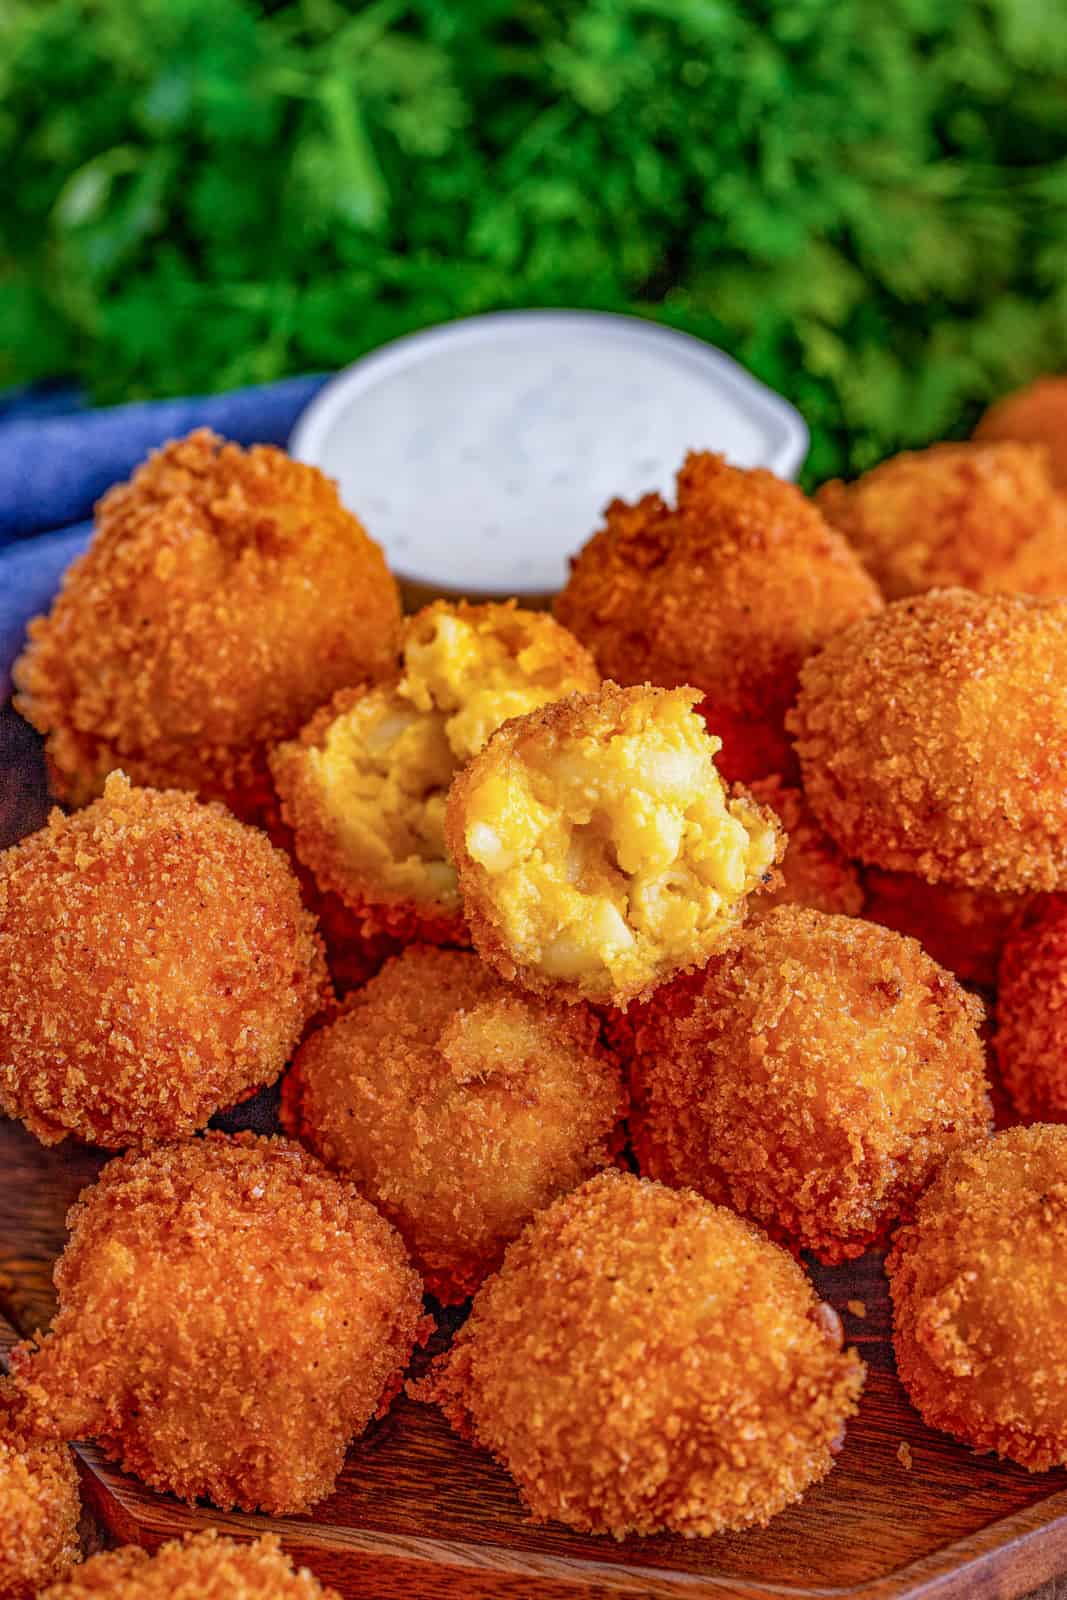 Pile of Fried Mac and Cheese Balls with one open on top of stack.